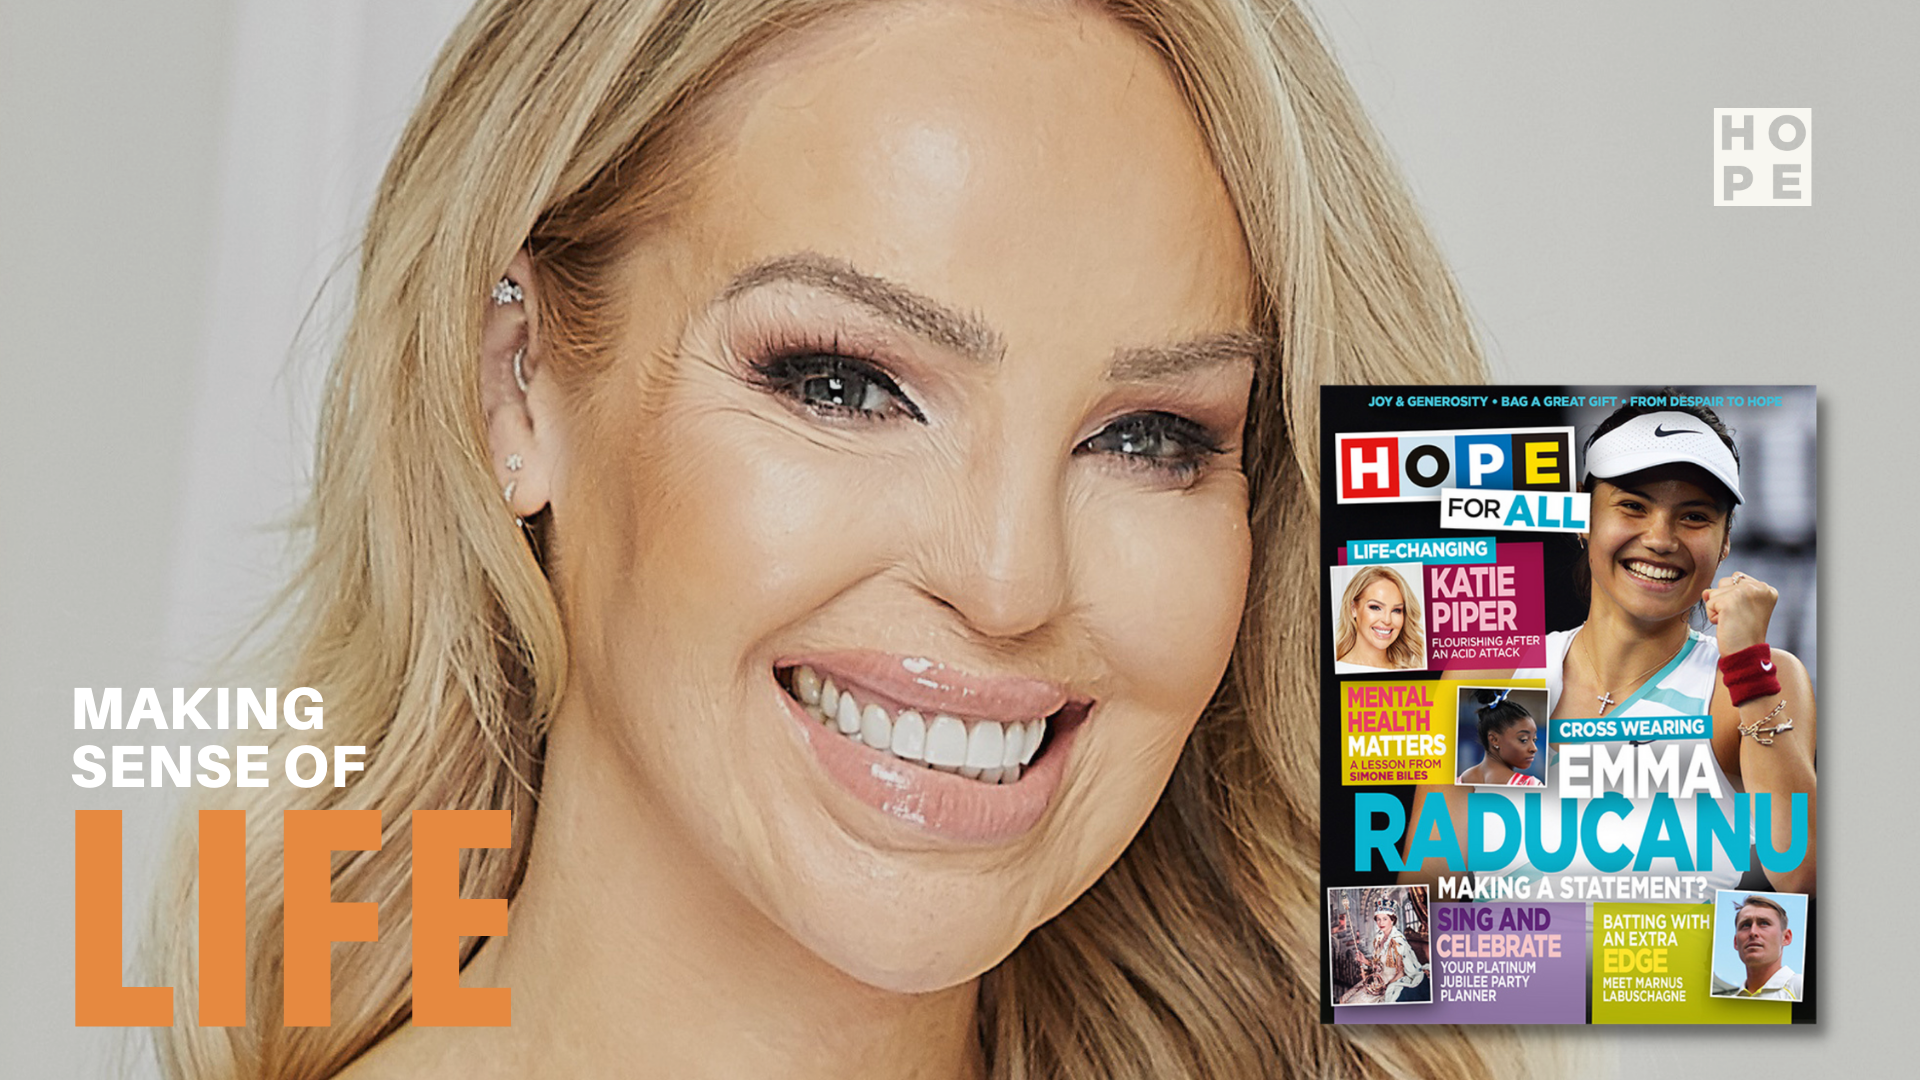 Katie piper front cover